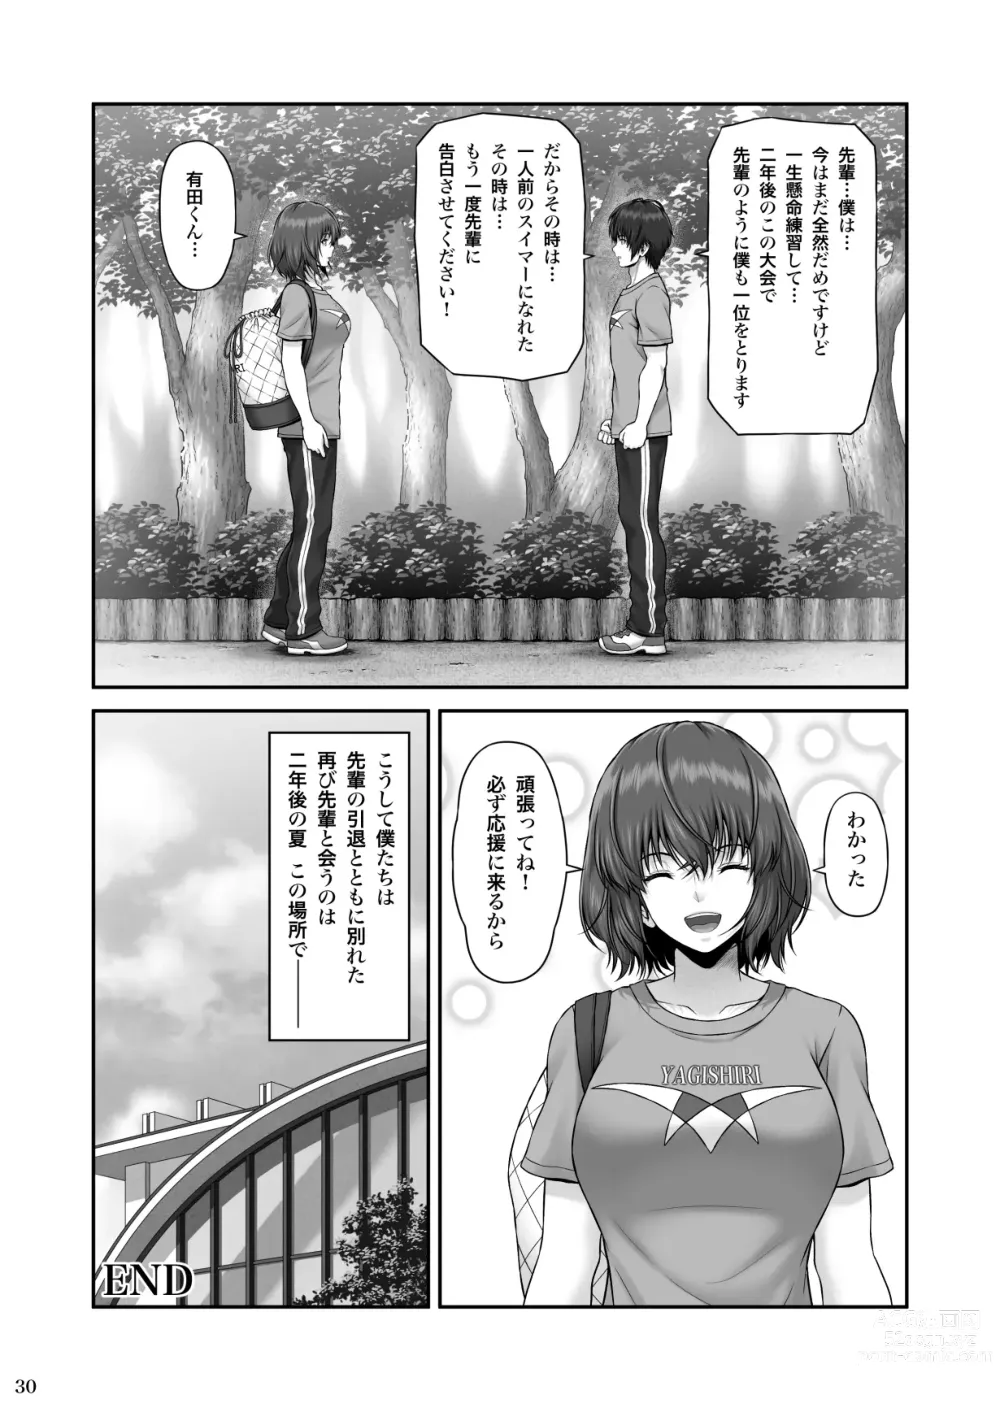 Page 31 of doujinshi CRAZY SWIMMER First Stage